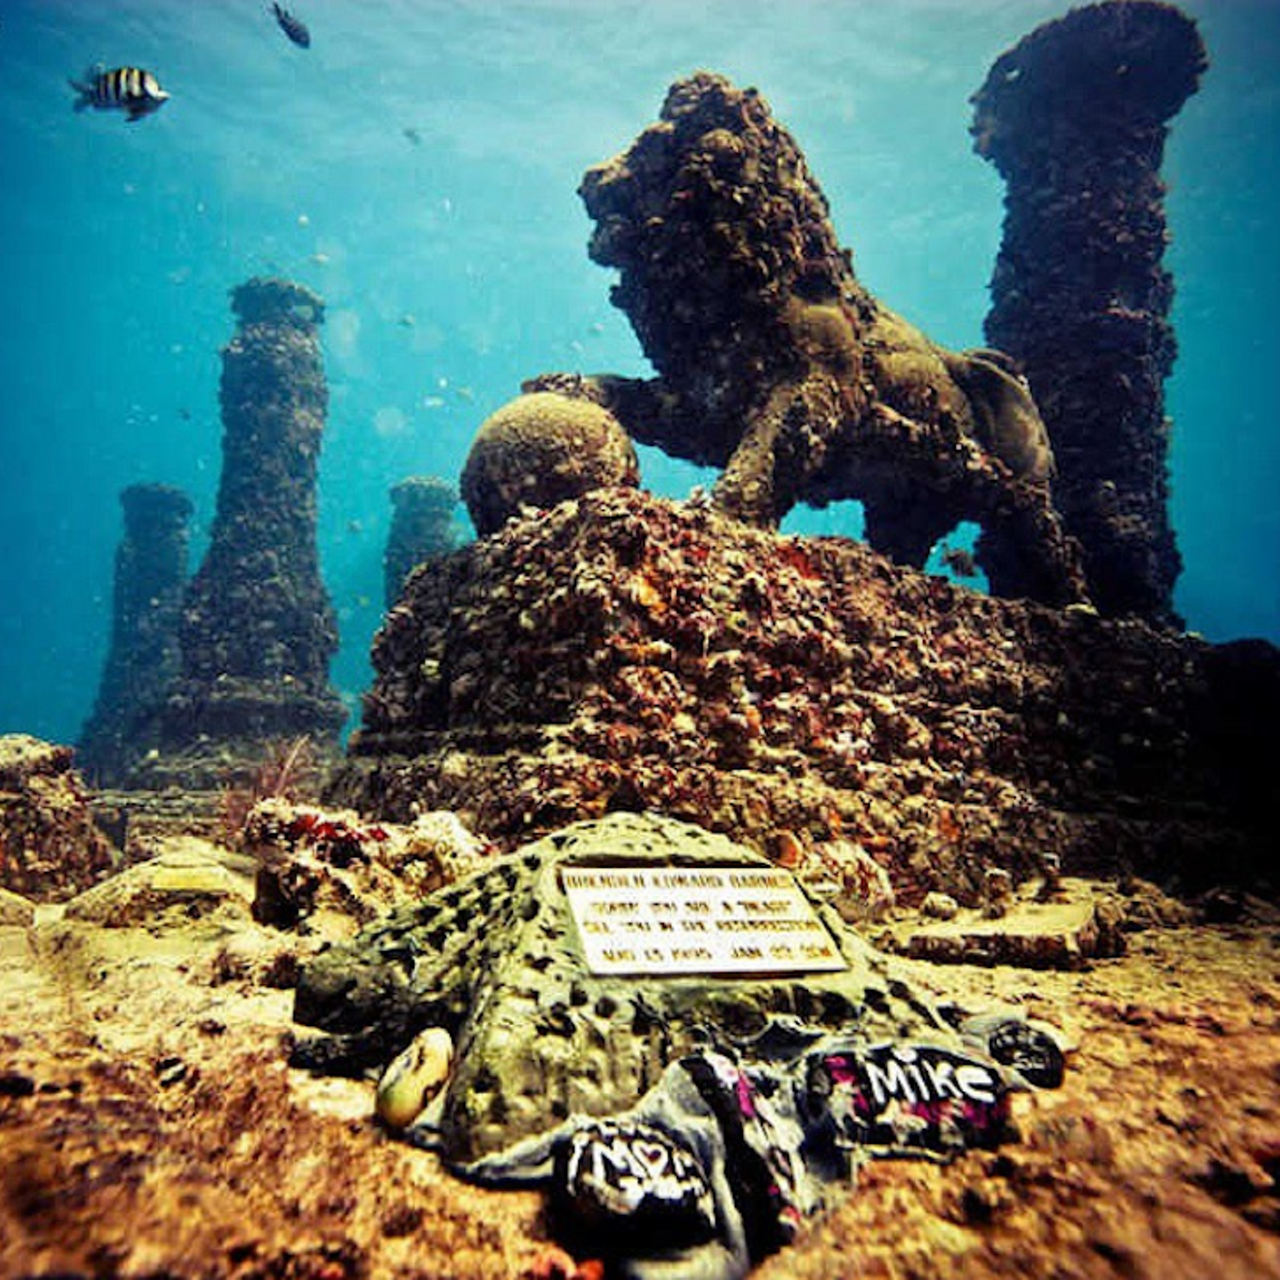 Neptune Memorial Reef
300 Alton Road, Miami Beach | 954-655-3592
Cremated ashes are mixed with cement to form these super goth memorials that make up a 16-acre artificial reef called Neptune Memorial Reef. These sunken monoliths are located about three miles off the coast of Key Biscayne.
Photo via amicsgais/Instagram